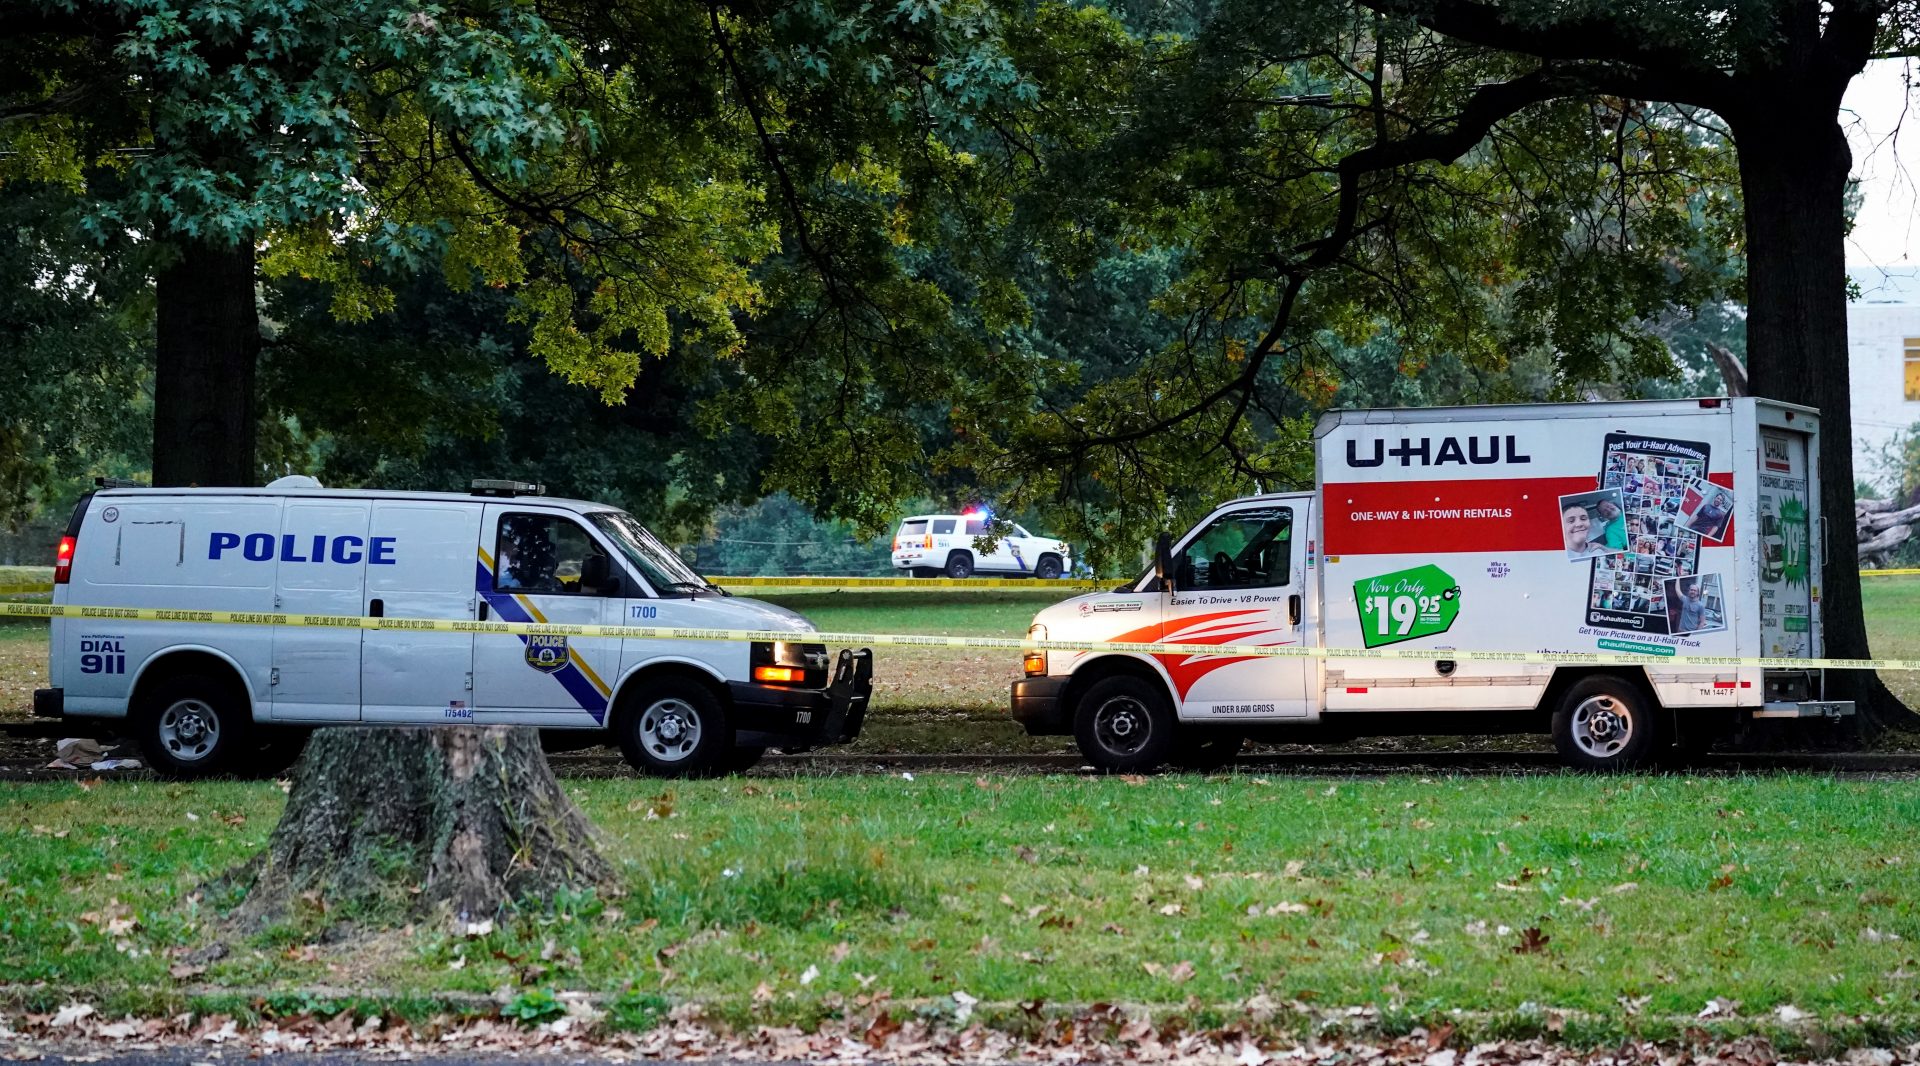 Police vehicles and a U-Haul truck are shown at a crime scene in Philadelphia, Monday, Oct. 4, 2021. Police in Philadelphia say a nurse fatally shot his co-worker at a hospital, fled the scene and was shot in a gunfight with police that wounded two officers.